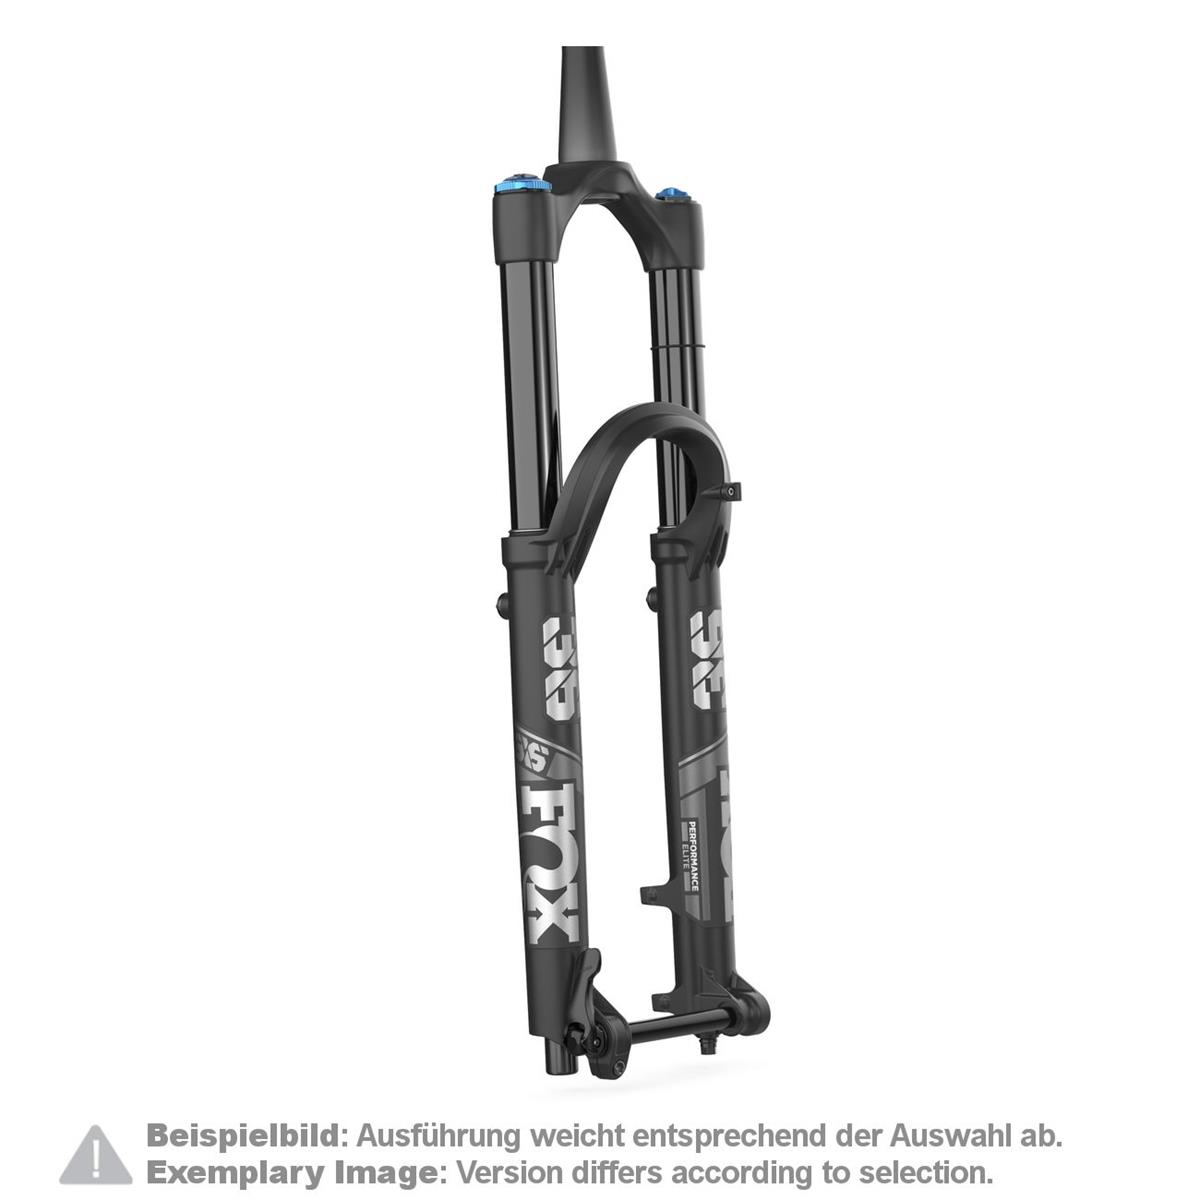 Fox Racing Shox Forcella 36 Float Performance Elite 29 Pollici, 15x110 mm, GRIP 2, 44 mm Offset, 160 mm